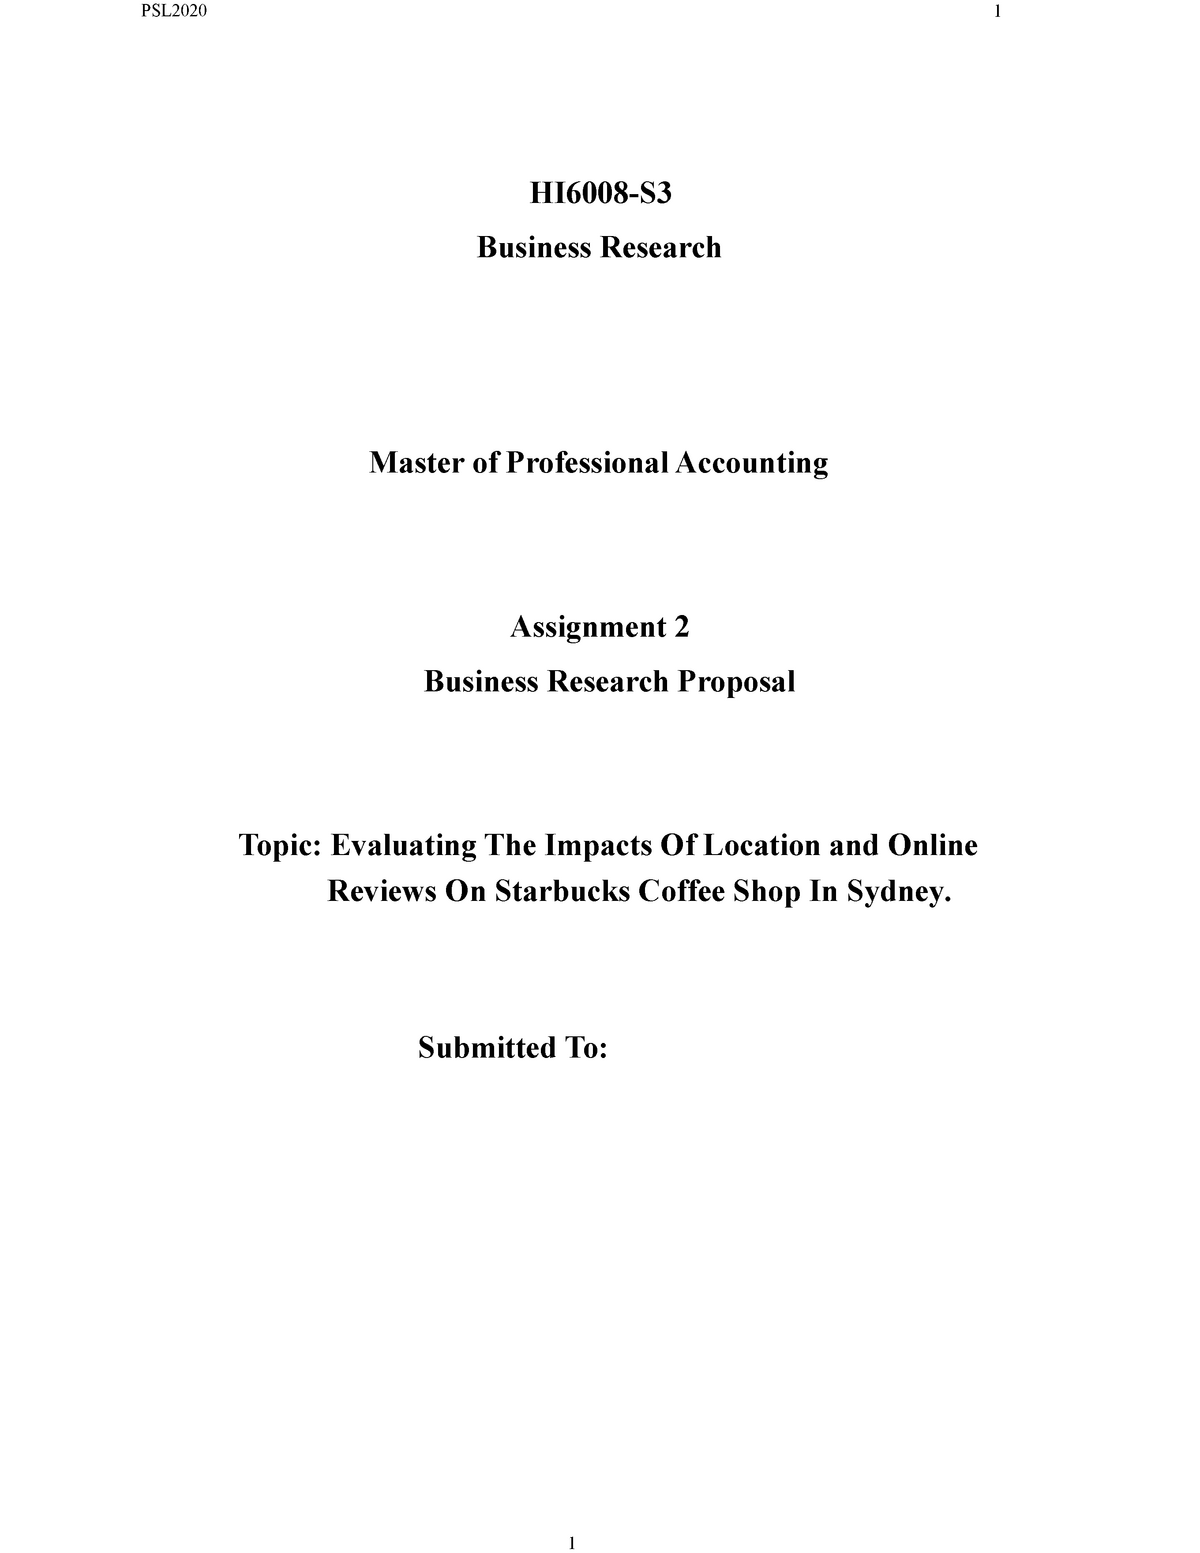 business research proposal